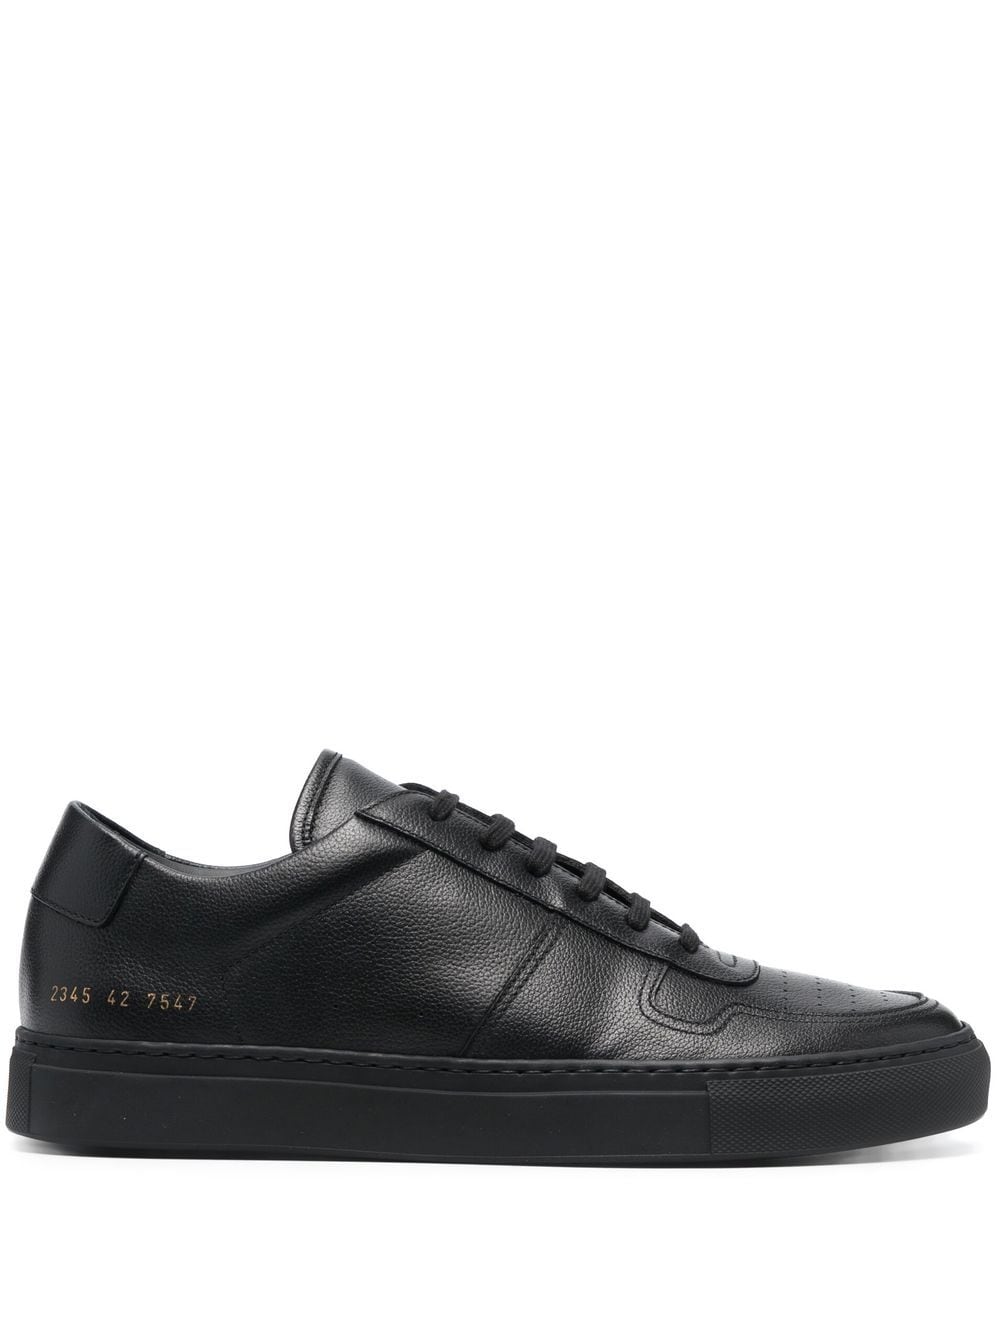 Common Projects lace-up leather sneakers - Black von Common Projects